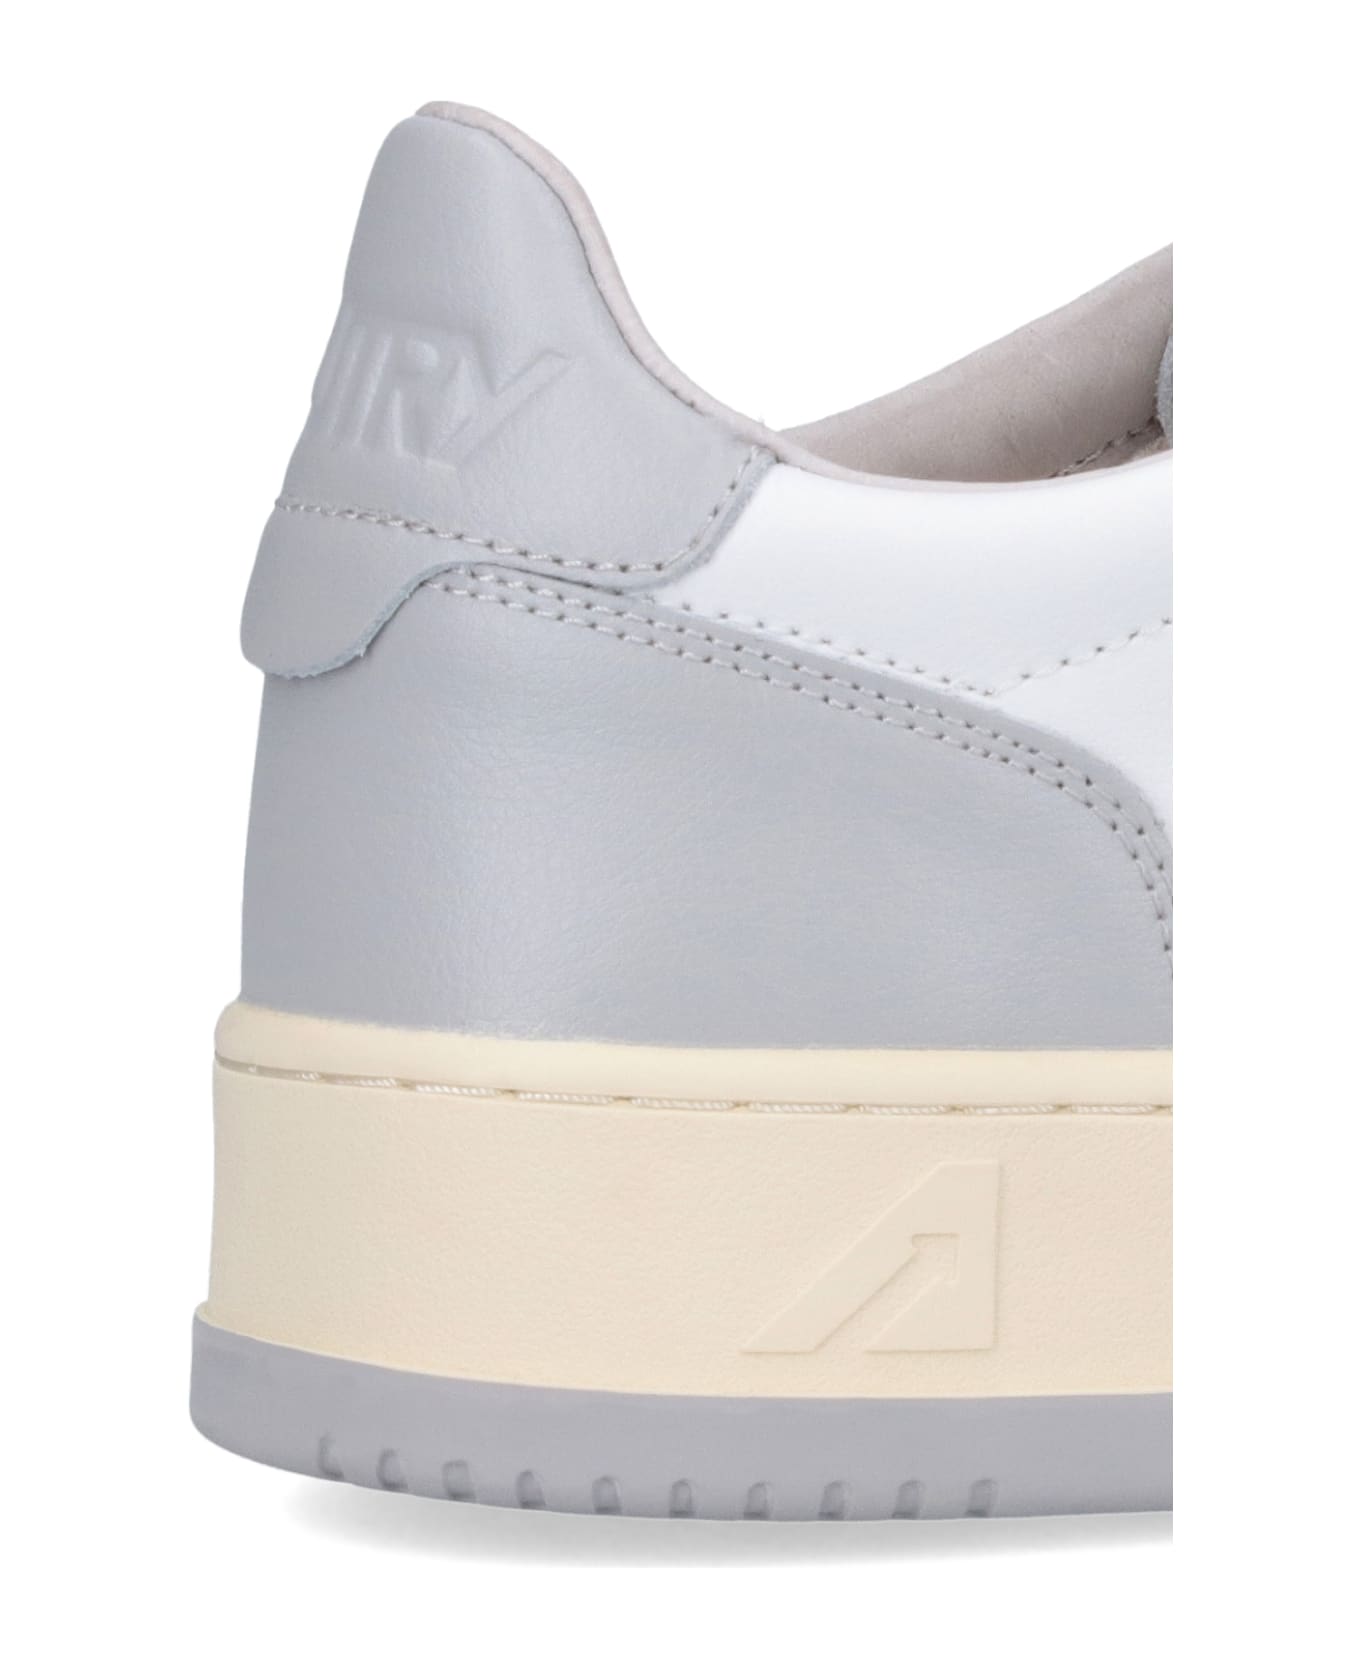 Autry Grey And White Two-tone Leather Medalist Low Sneakers - White/grey